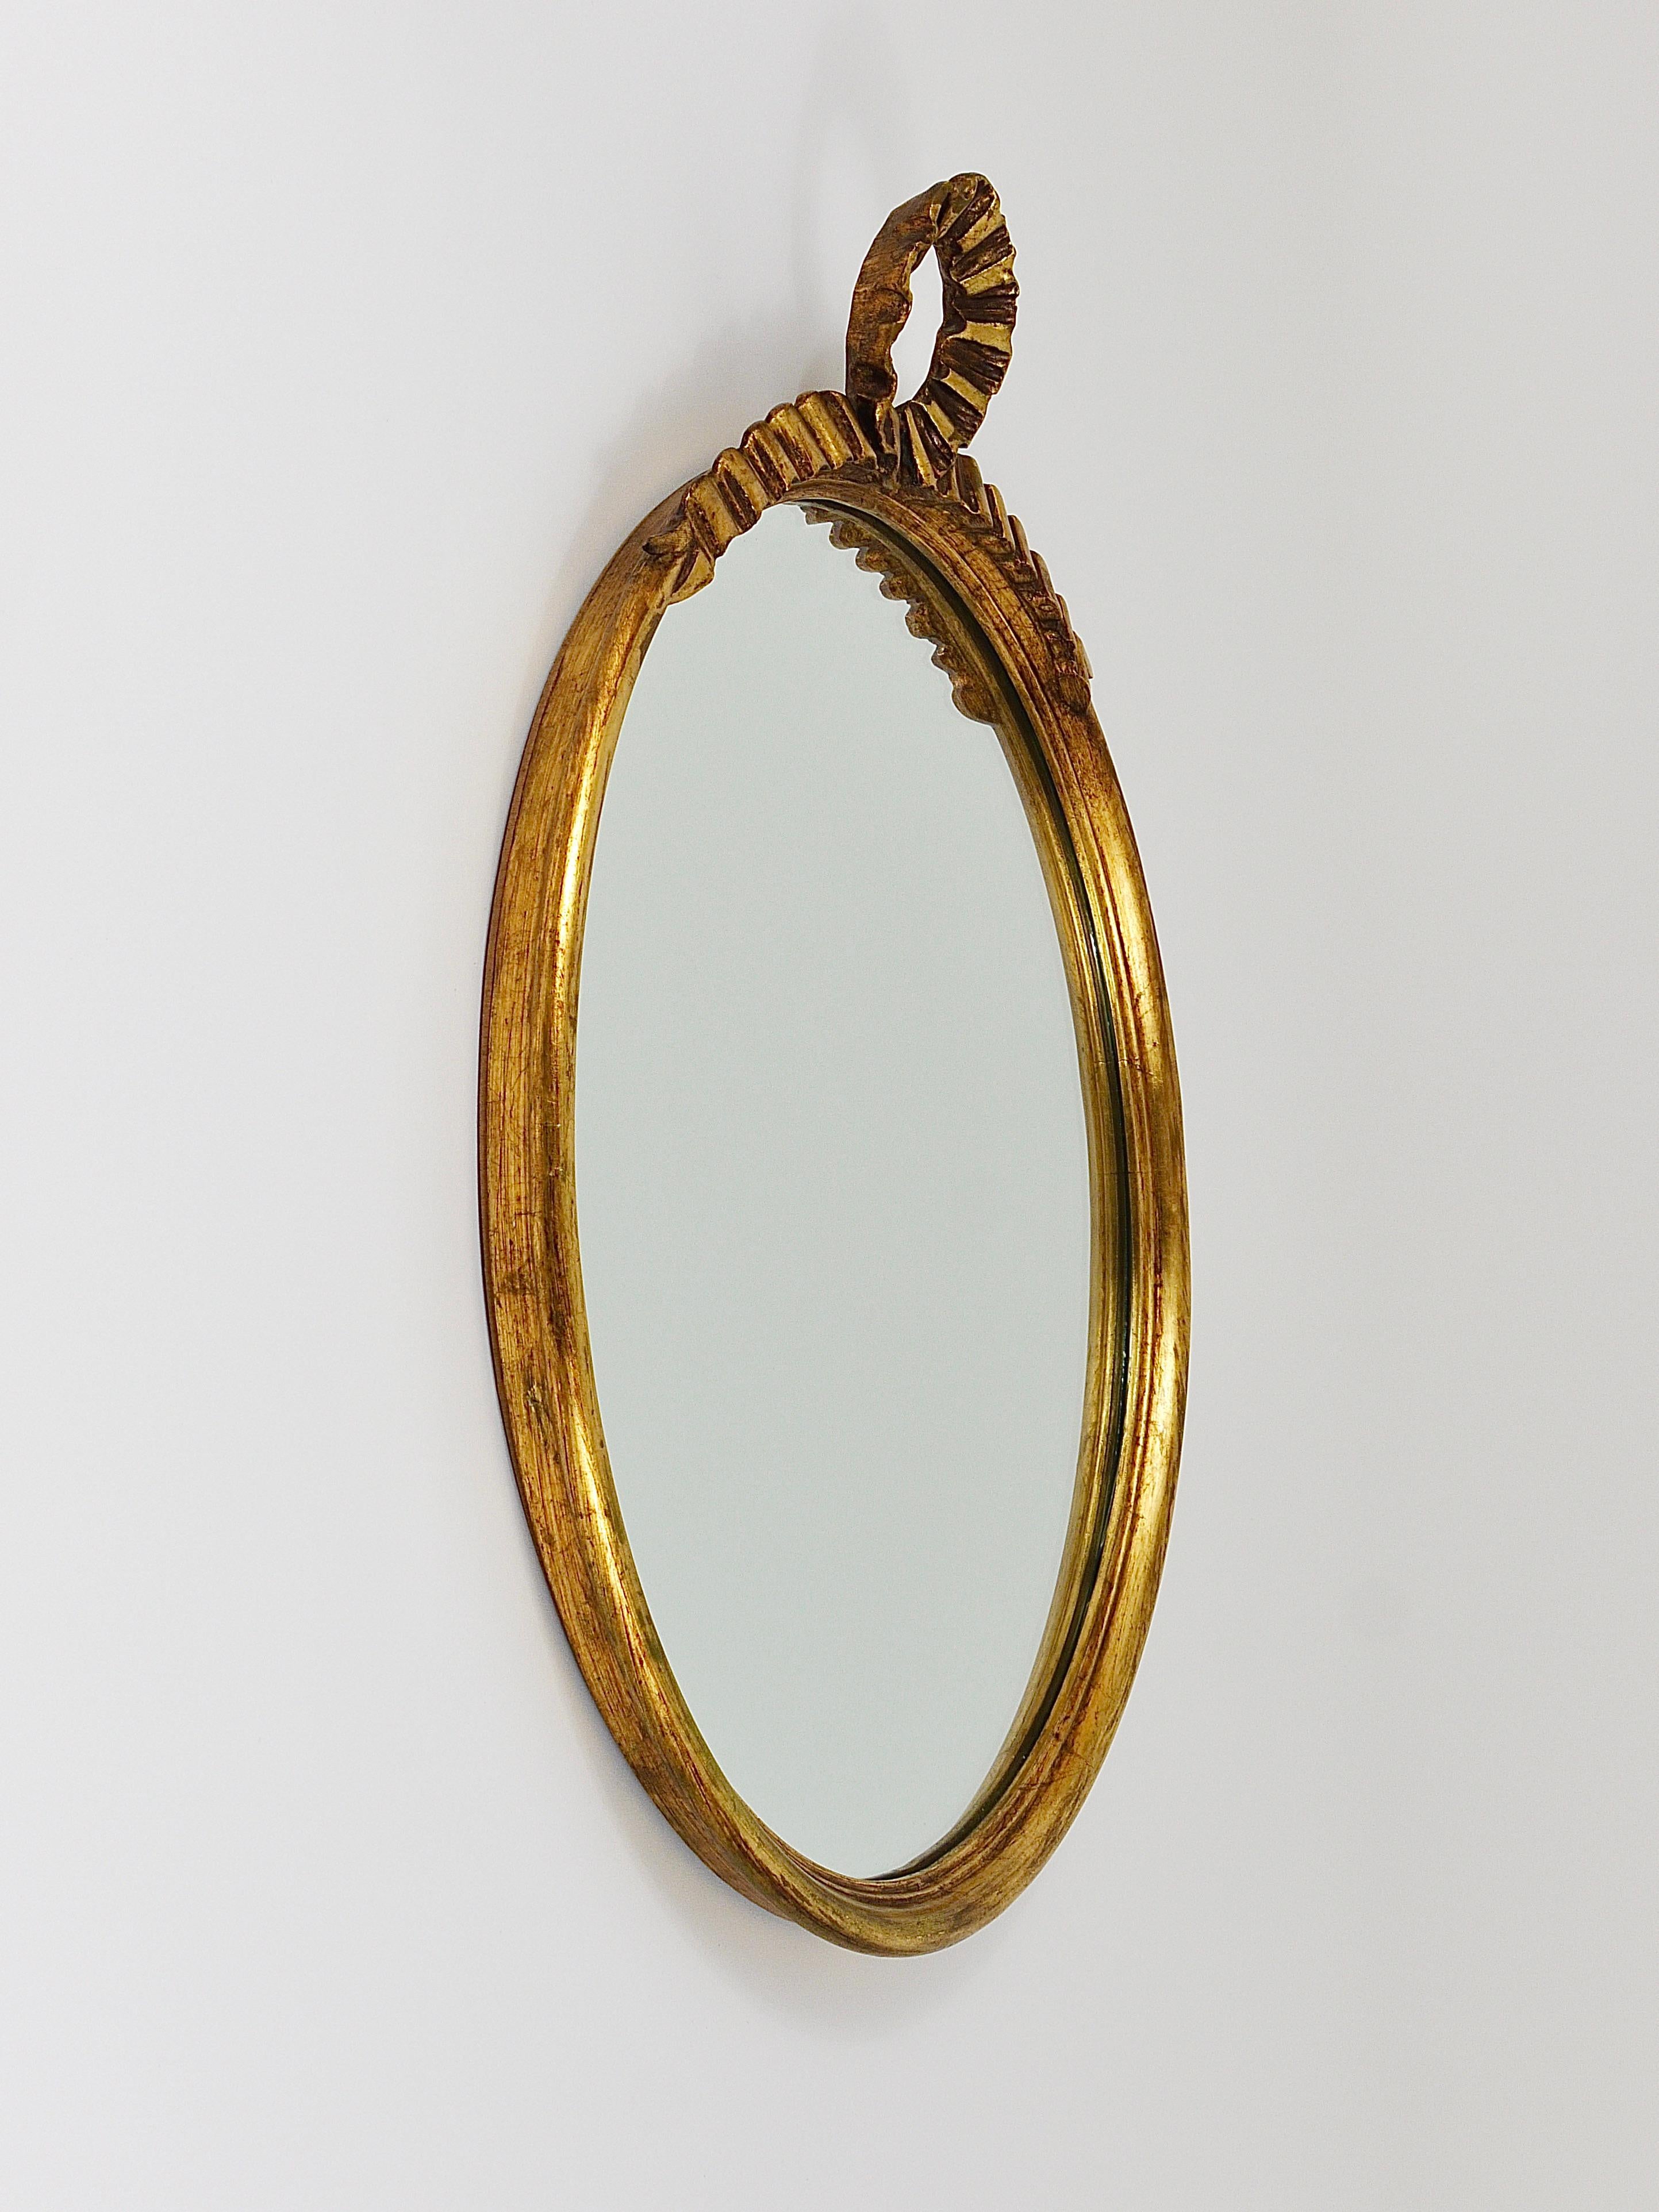 Round Midcentury Gilt Wood Wall Mirror, C. Allodi & G. Subelli, Italy, 1950s For Sale 6